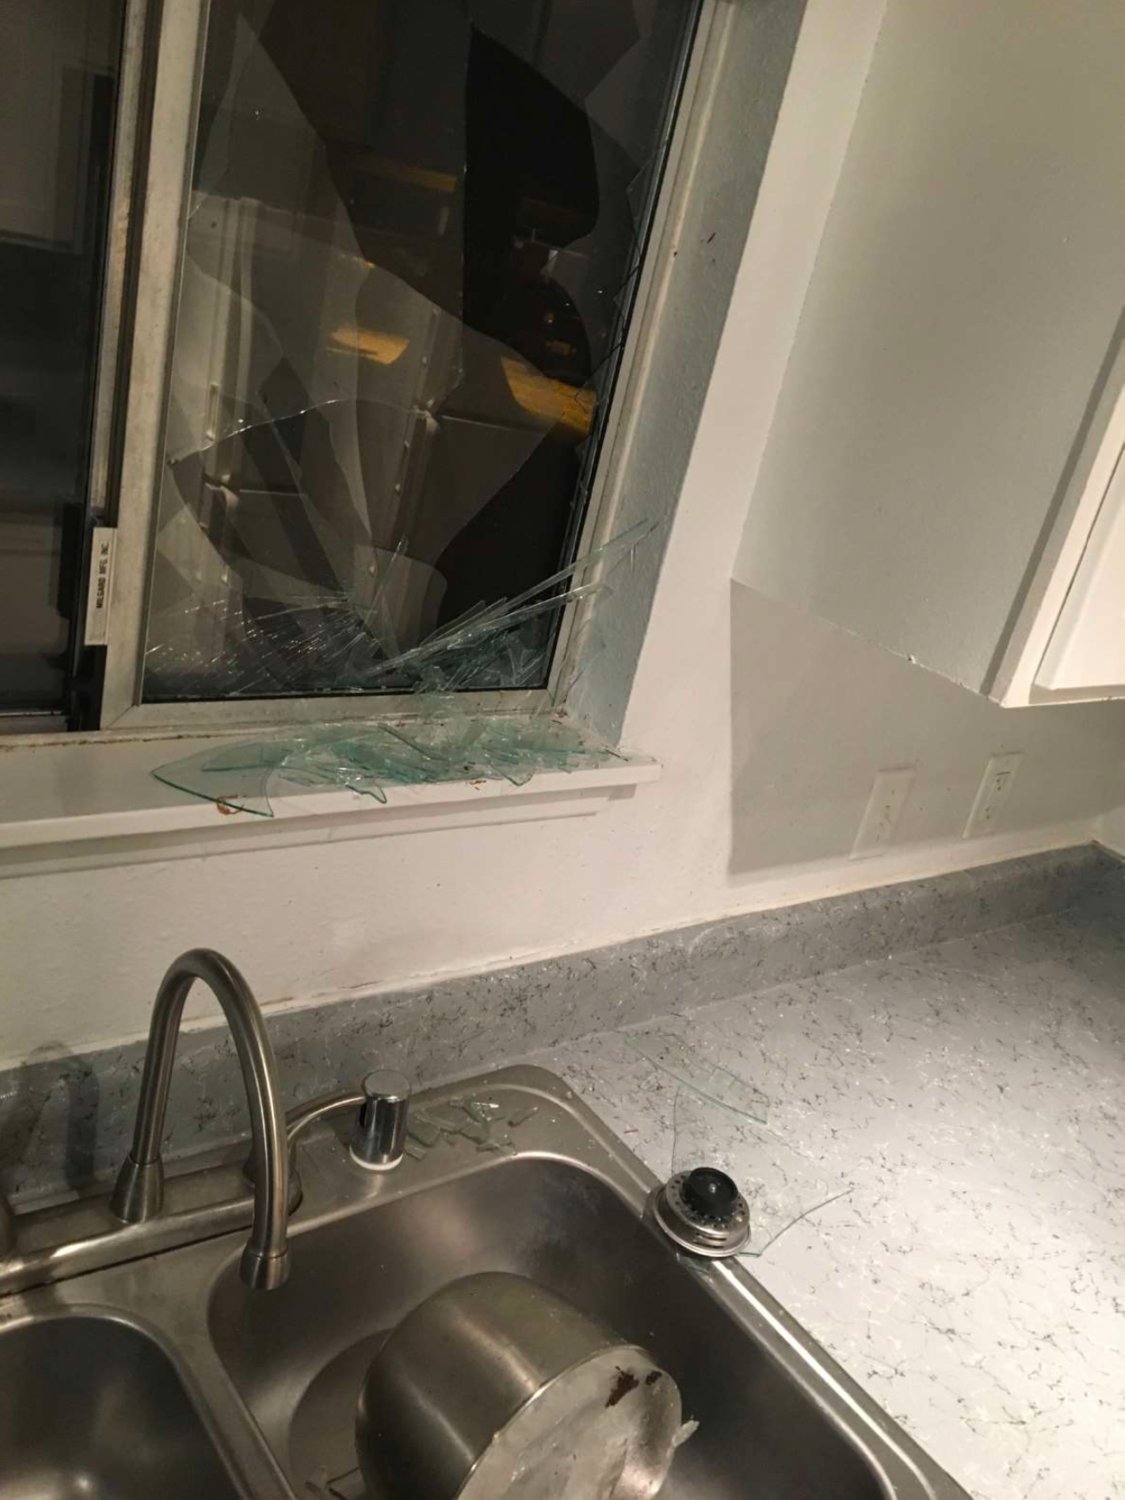 A window in the couple’s home was damaged in the incident on New Year's Eve.